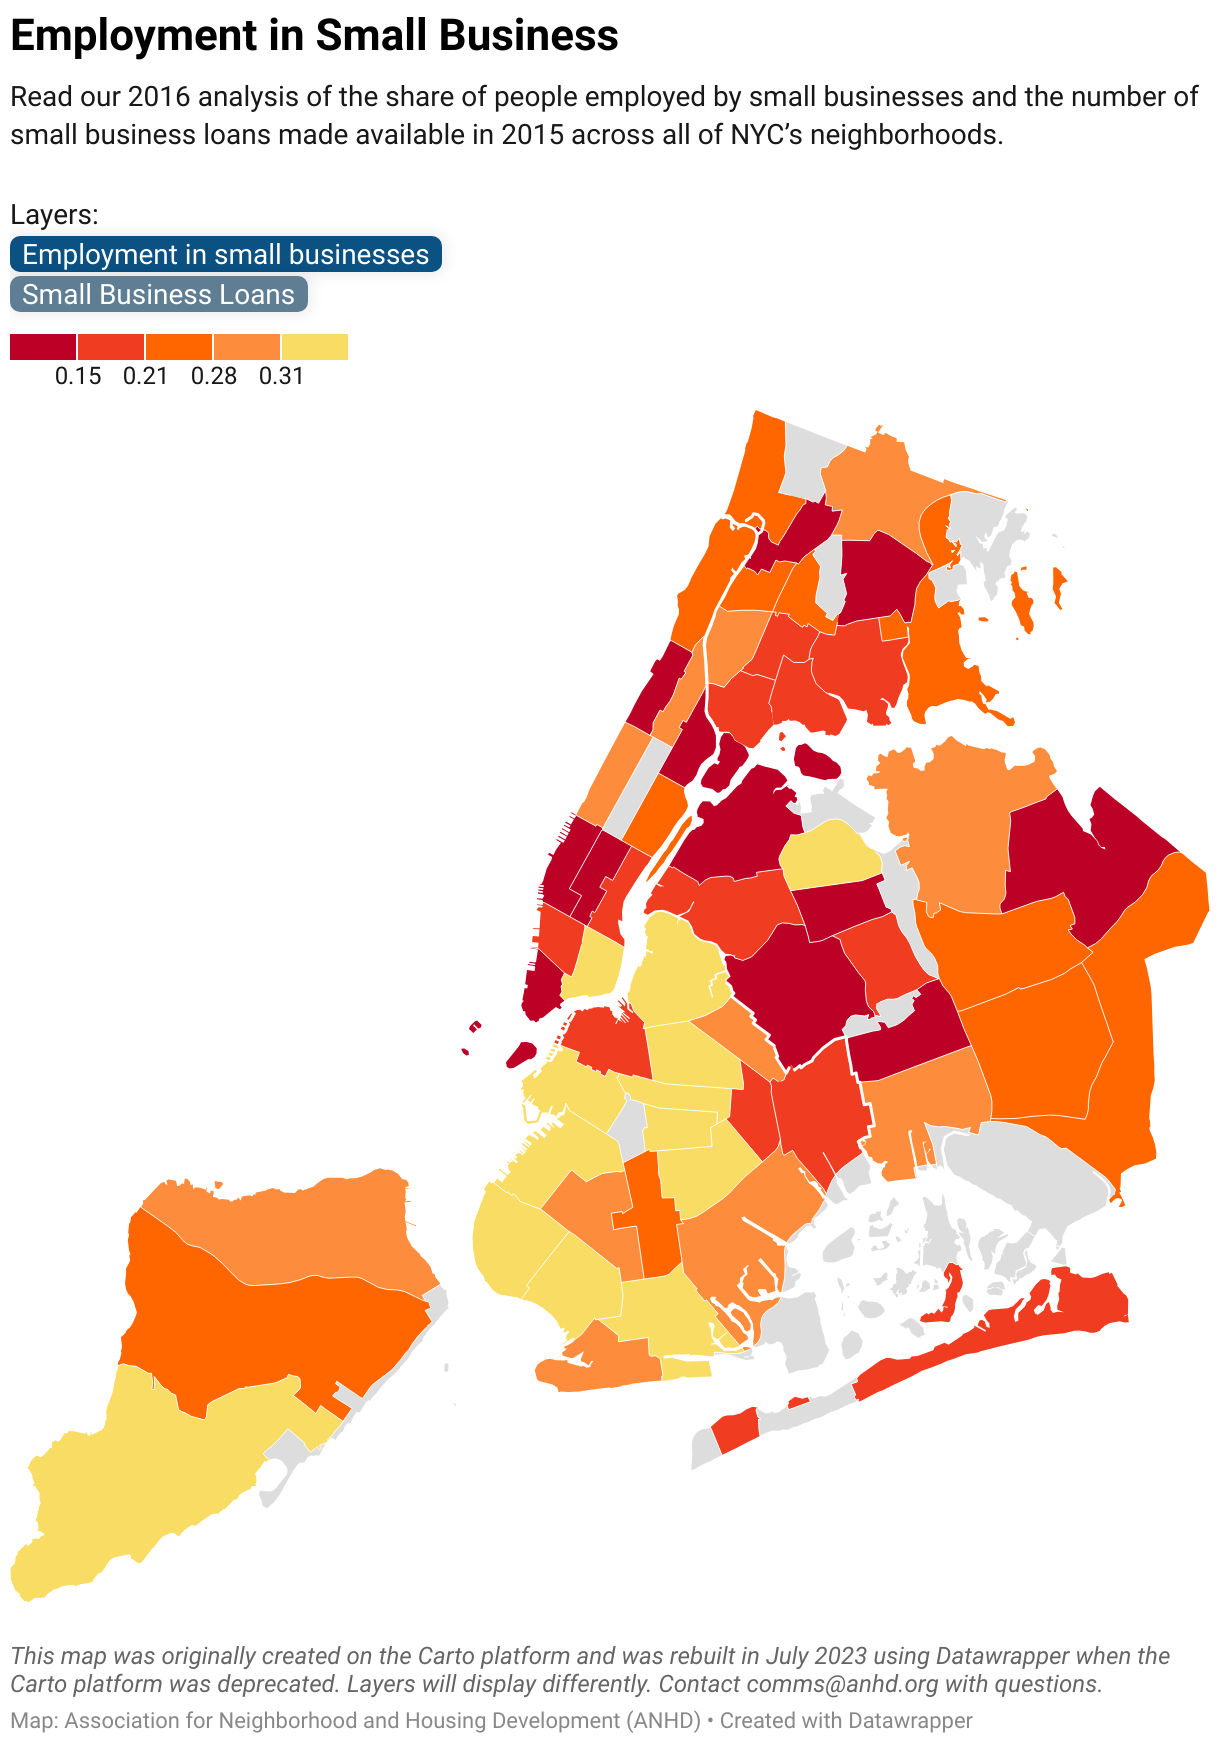 Map of small business loans by community district in New York City, data as of 2016